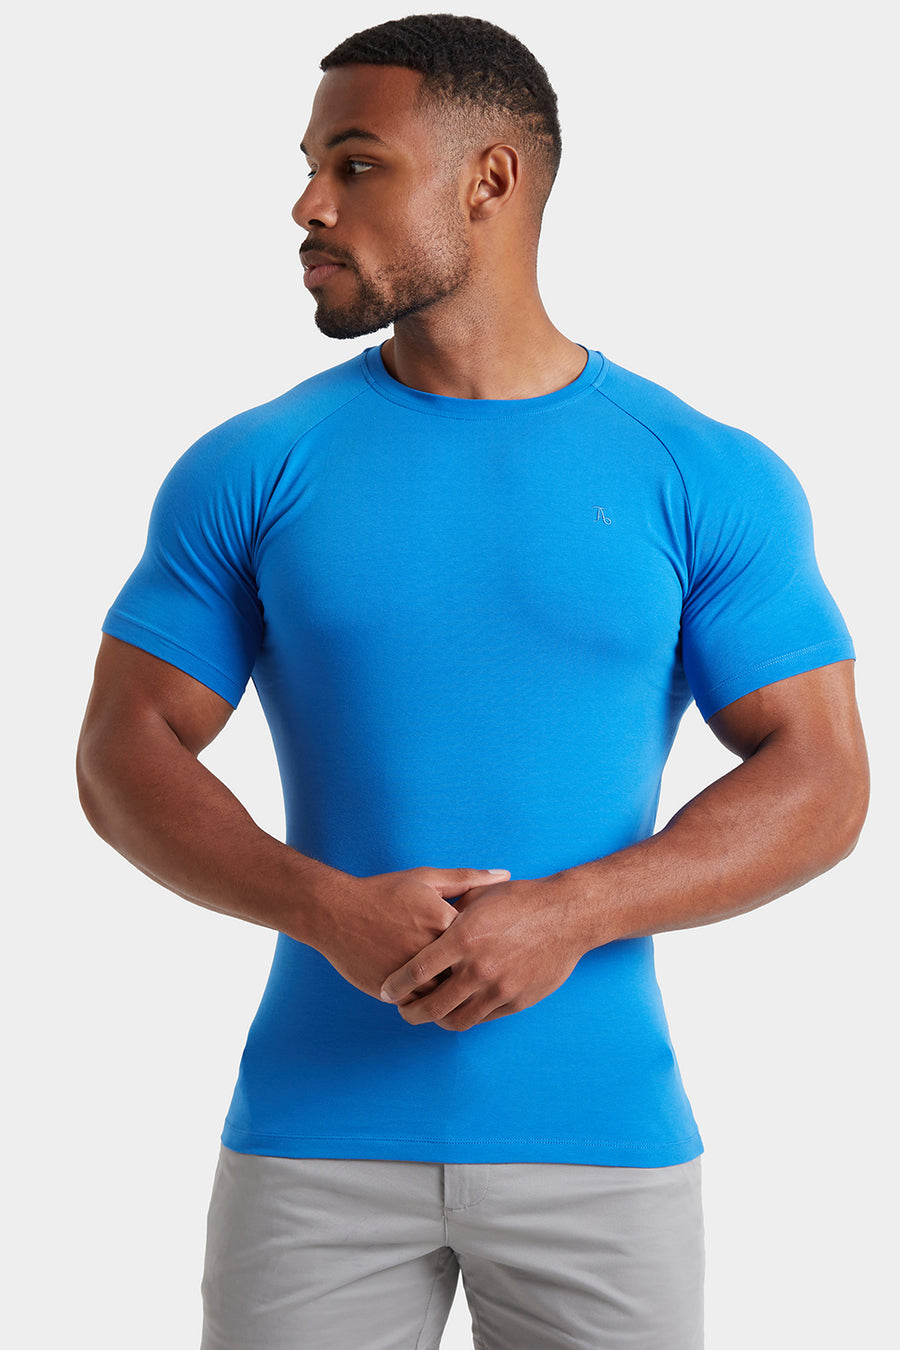 Premium Athletic Fit T-Shirt in Azure Blue - TAILORED ATHLETE - USA